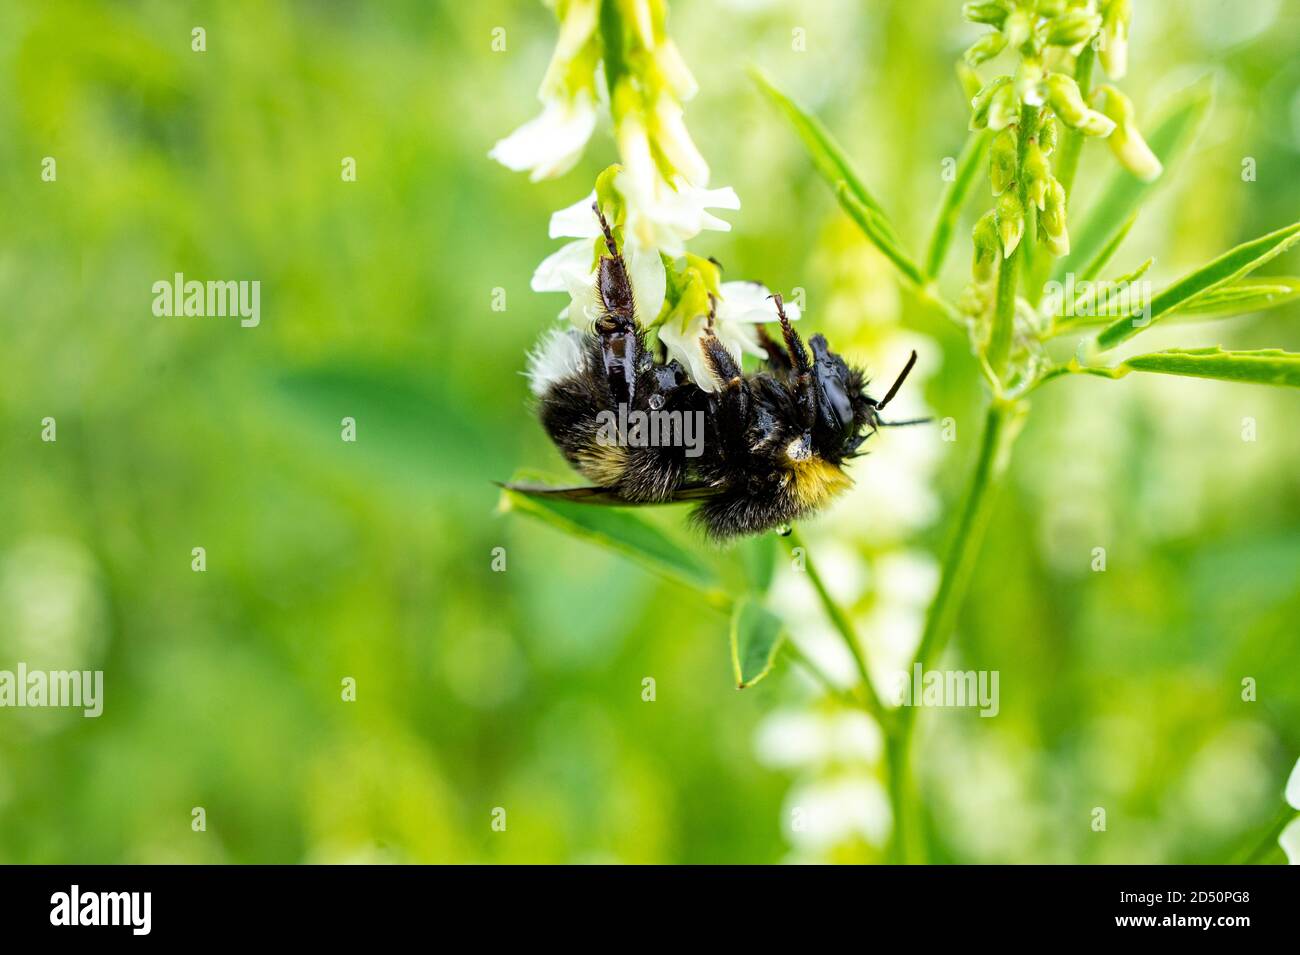 Close-up of a wet after the rain bumblebee hanging on a white flower sweet clover on a natural green background Stock Photo